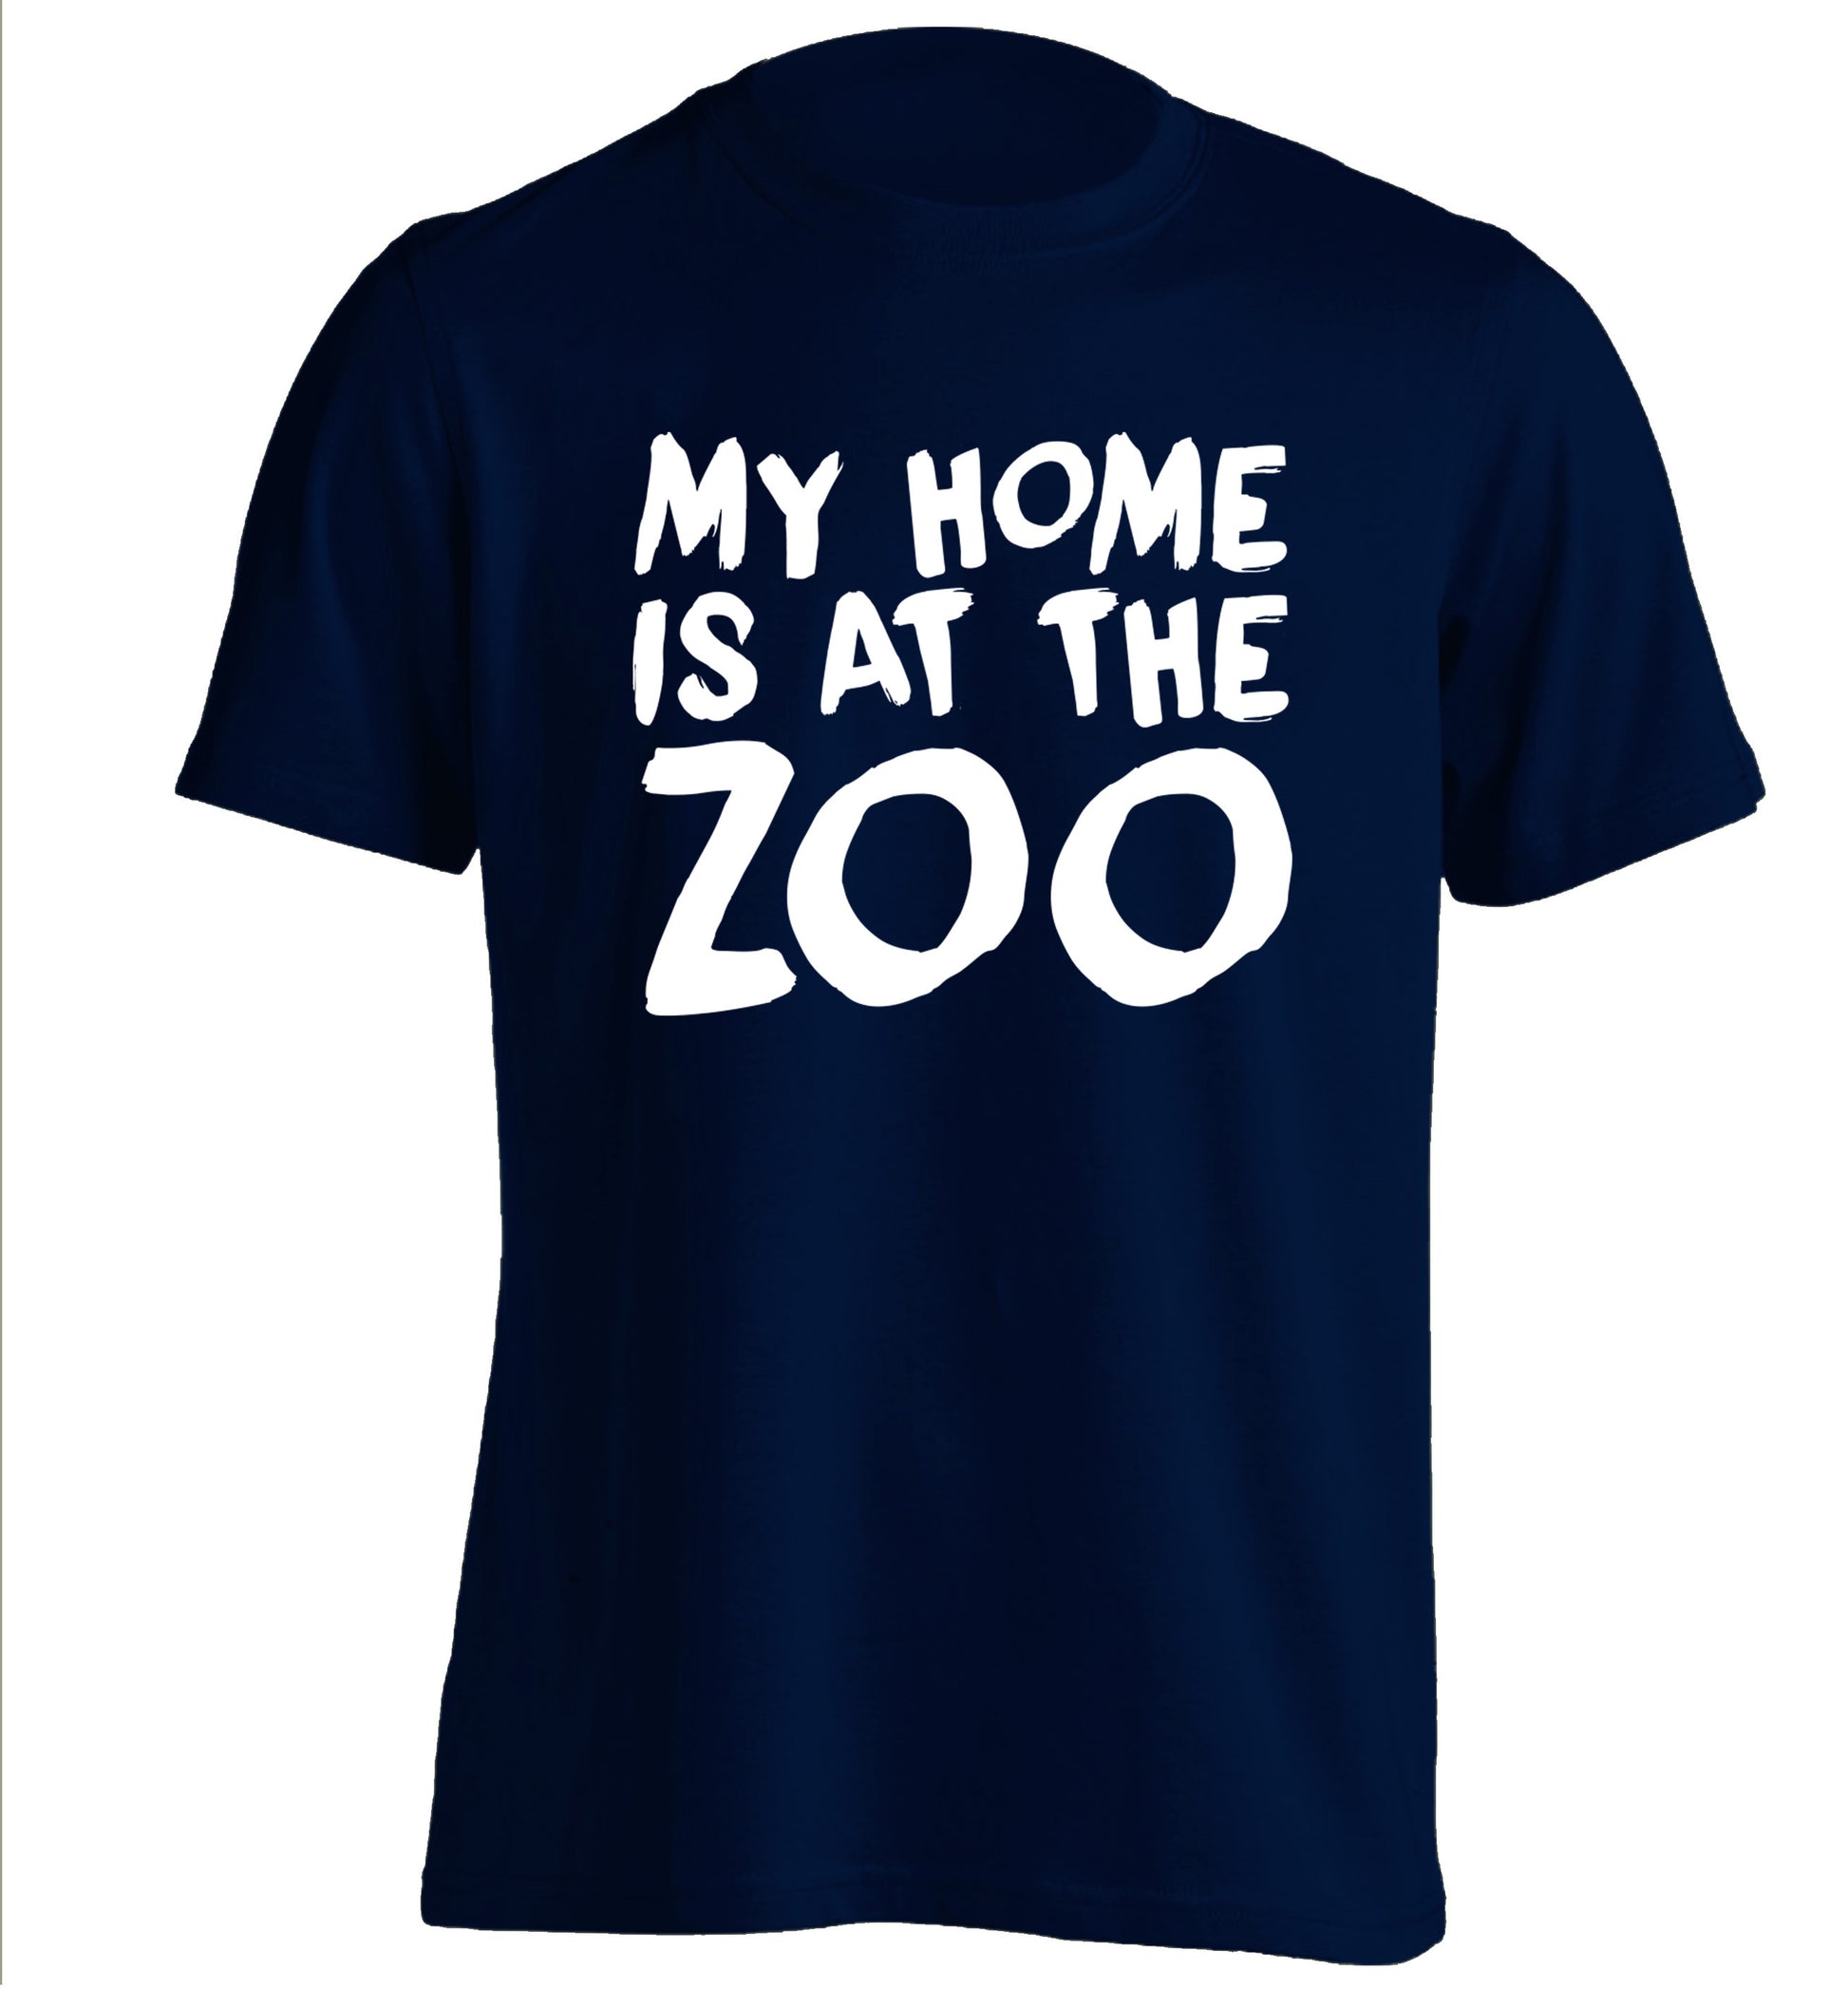 My home is at the zoo adults unisex navy Tshirt 2XL